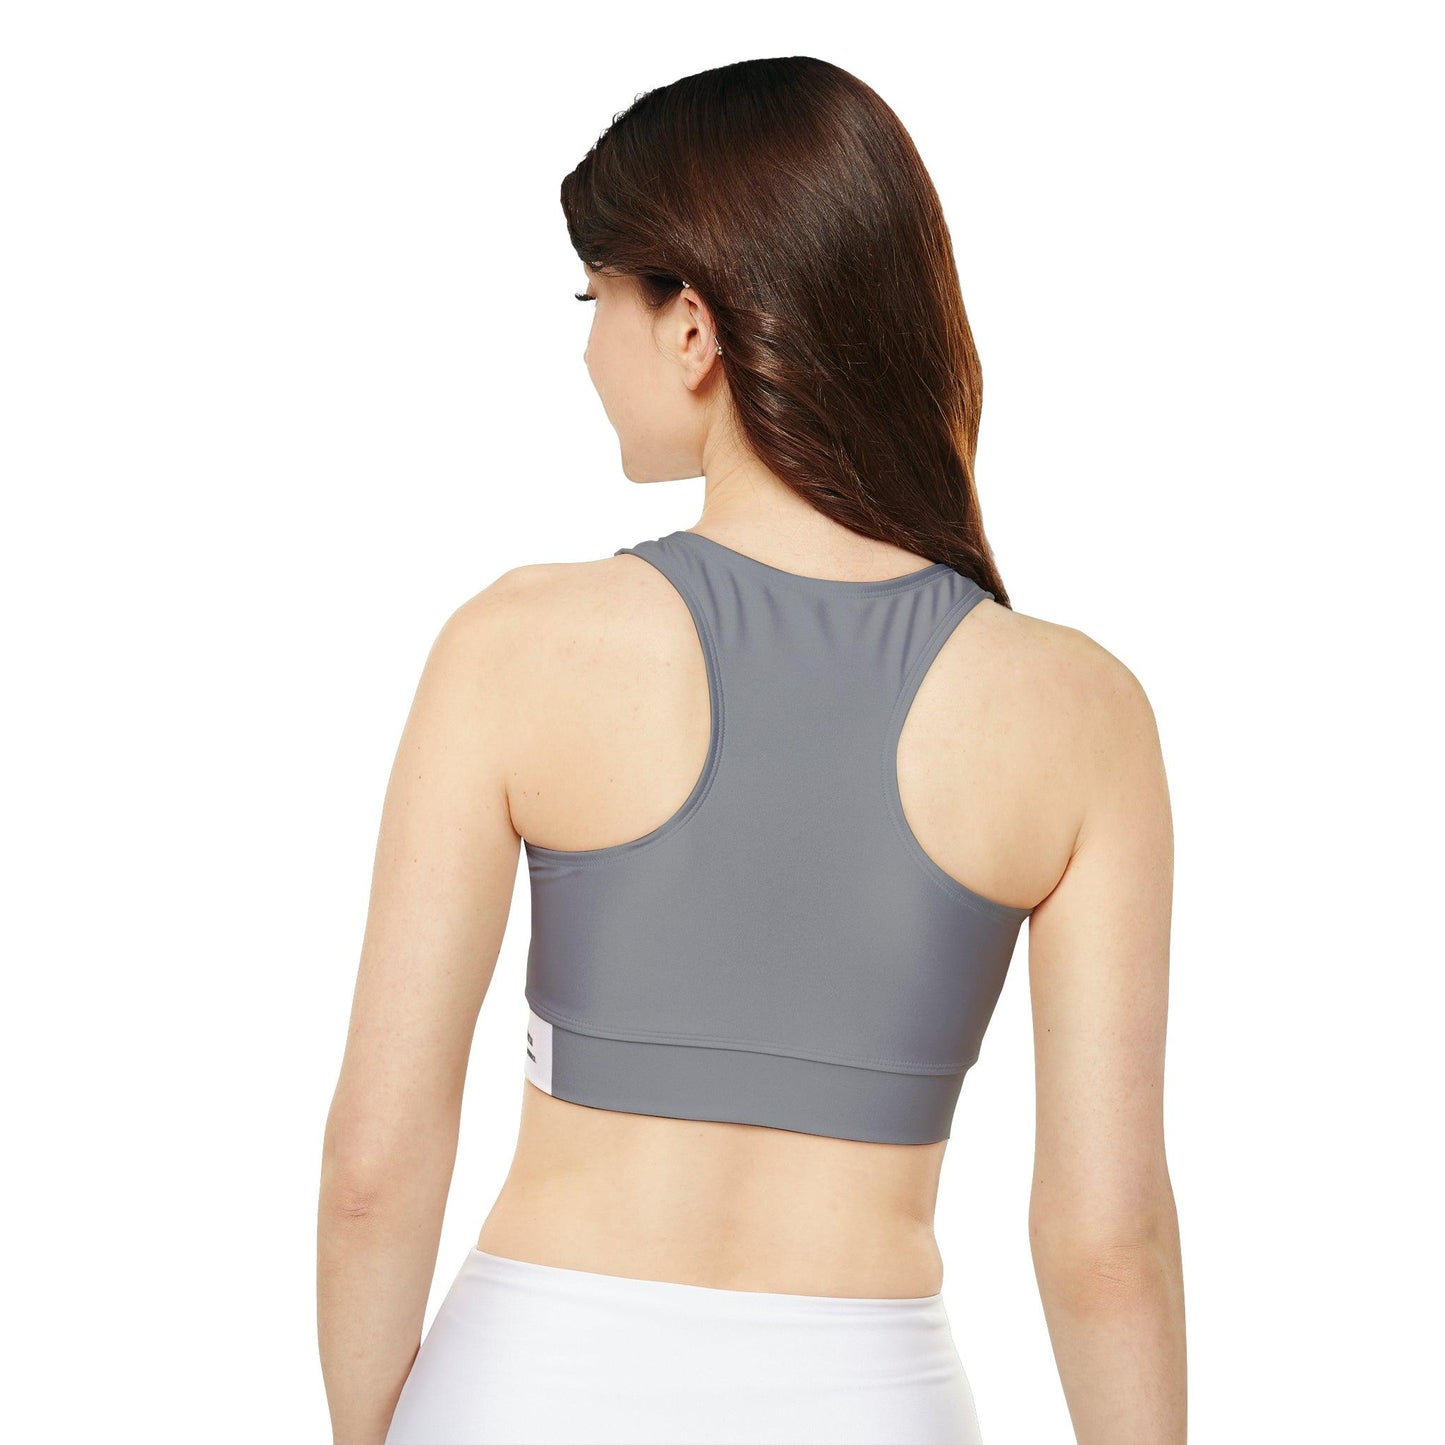 Fully Lined, Light Grey Padded Sports Bra - COFFEEBRE